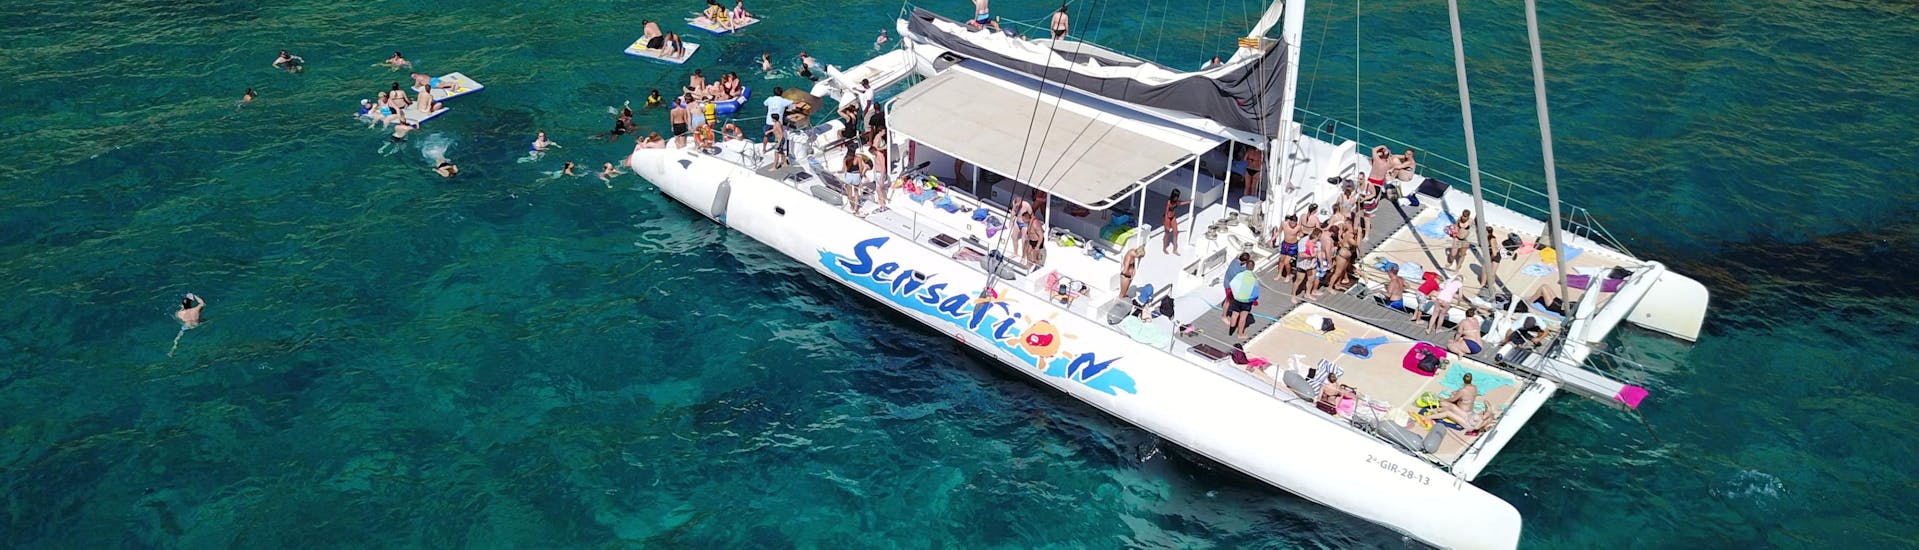 Picture of the catamaran ,used by Catamarans Sensations Costa Brava, on the open sea.